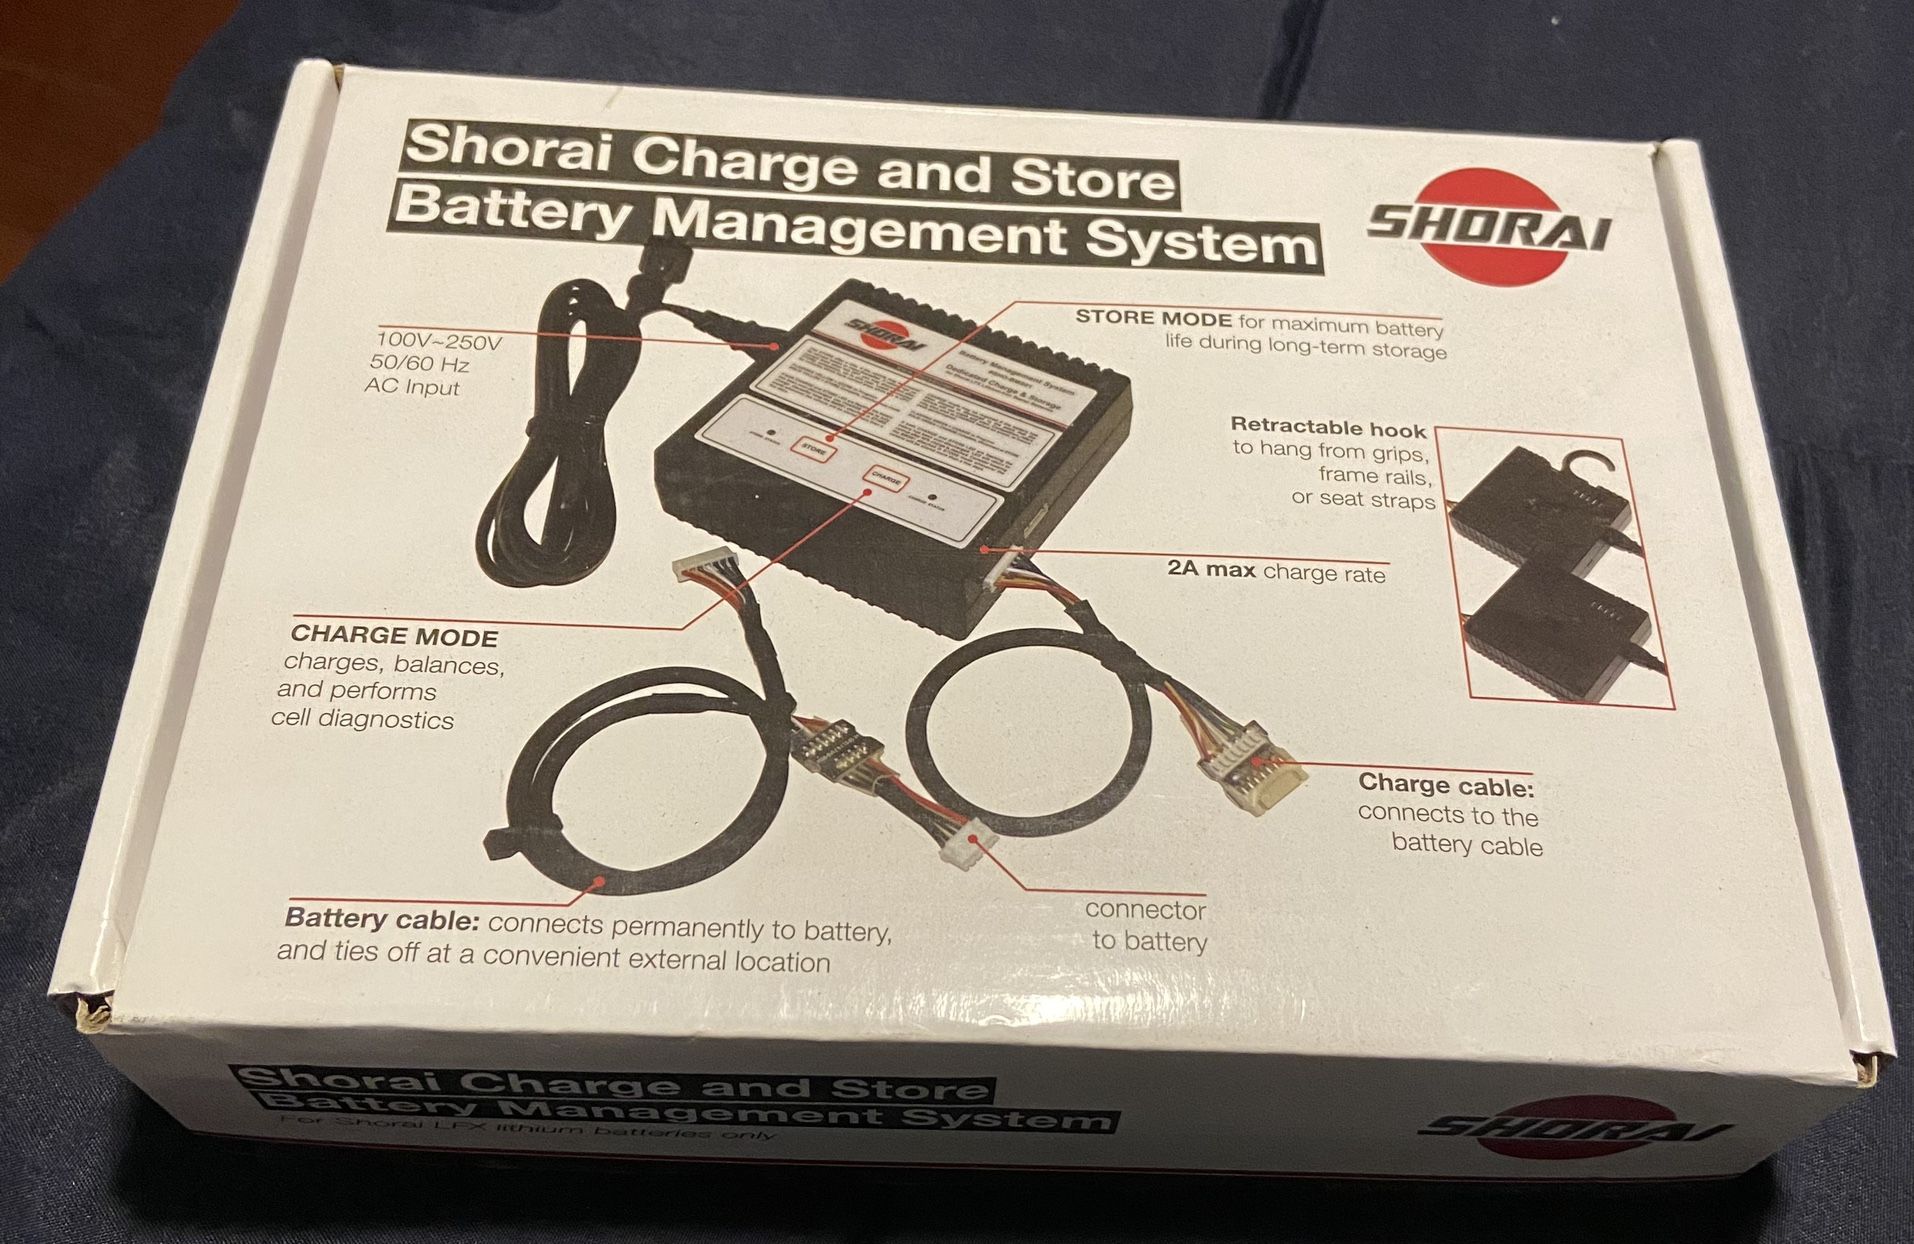 Shorai charger and store battery management system 